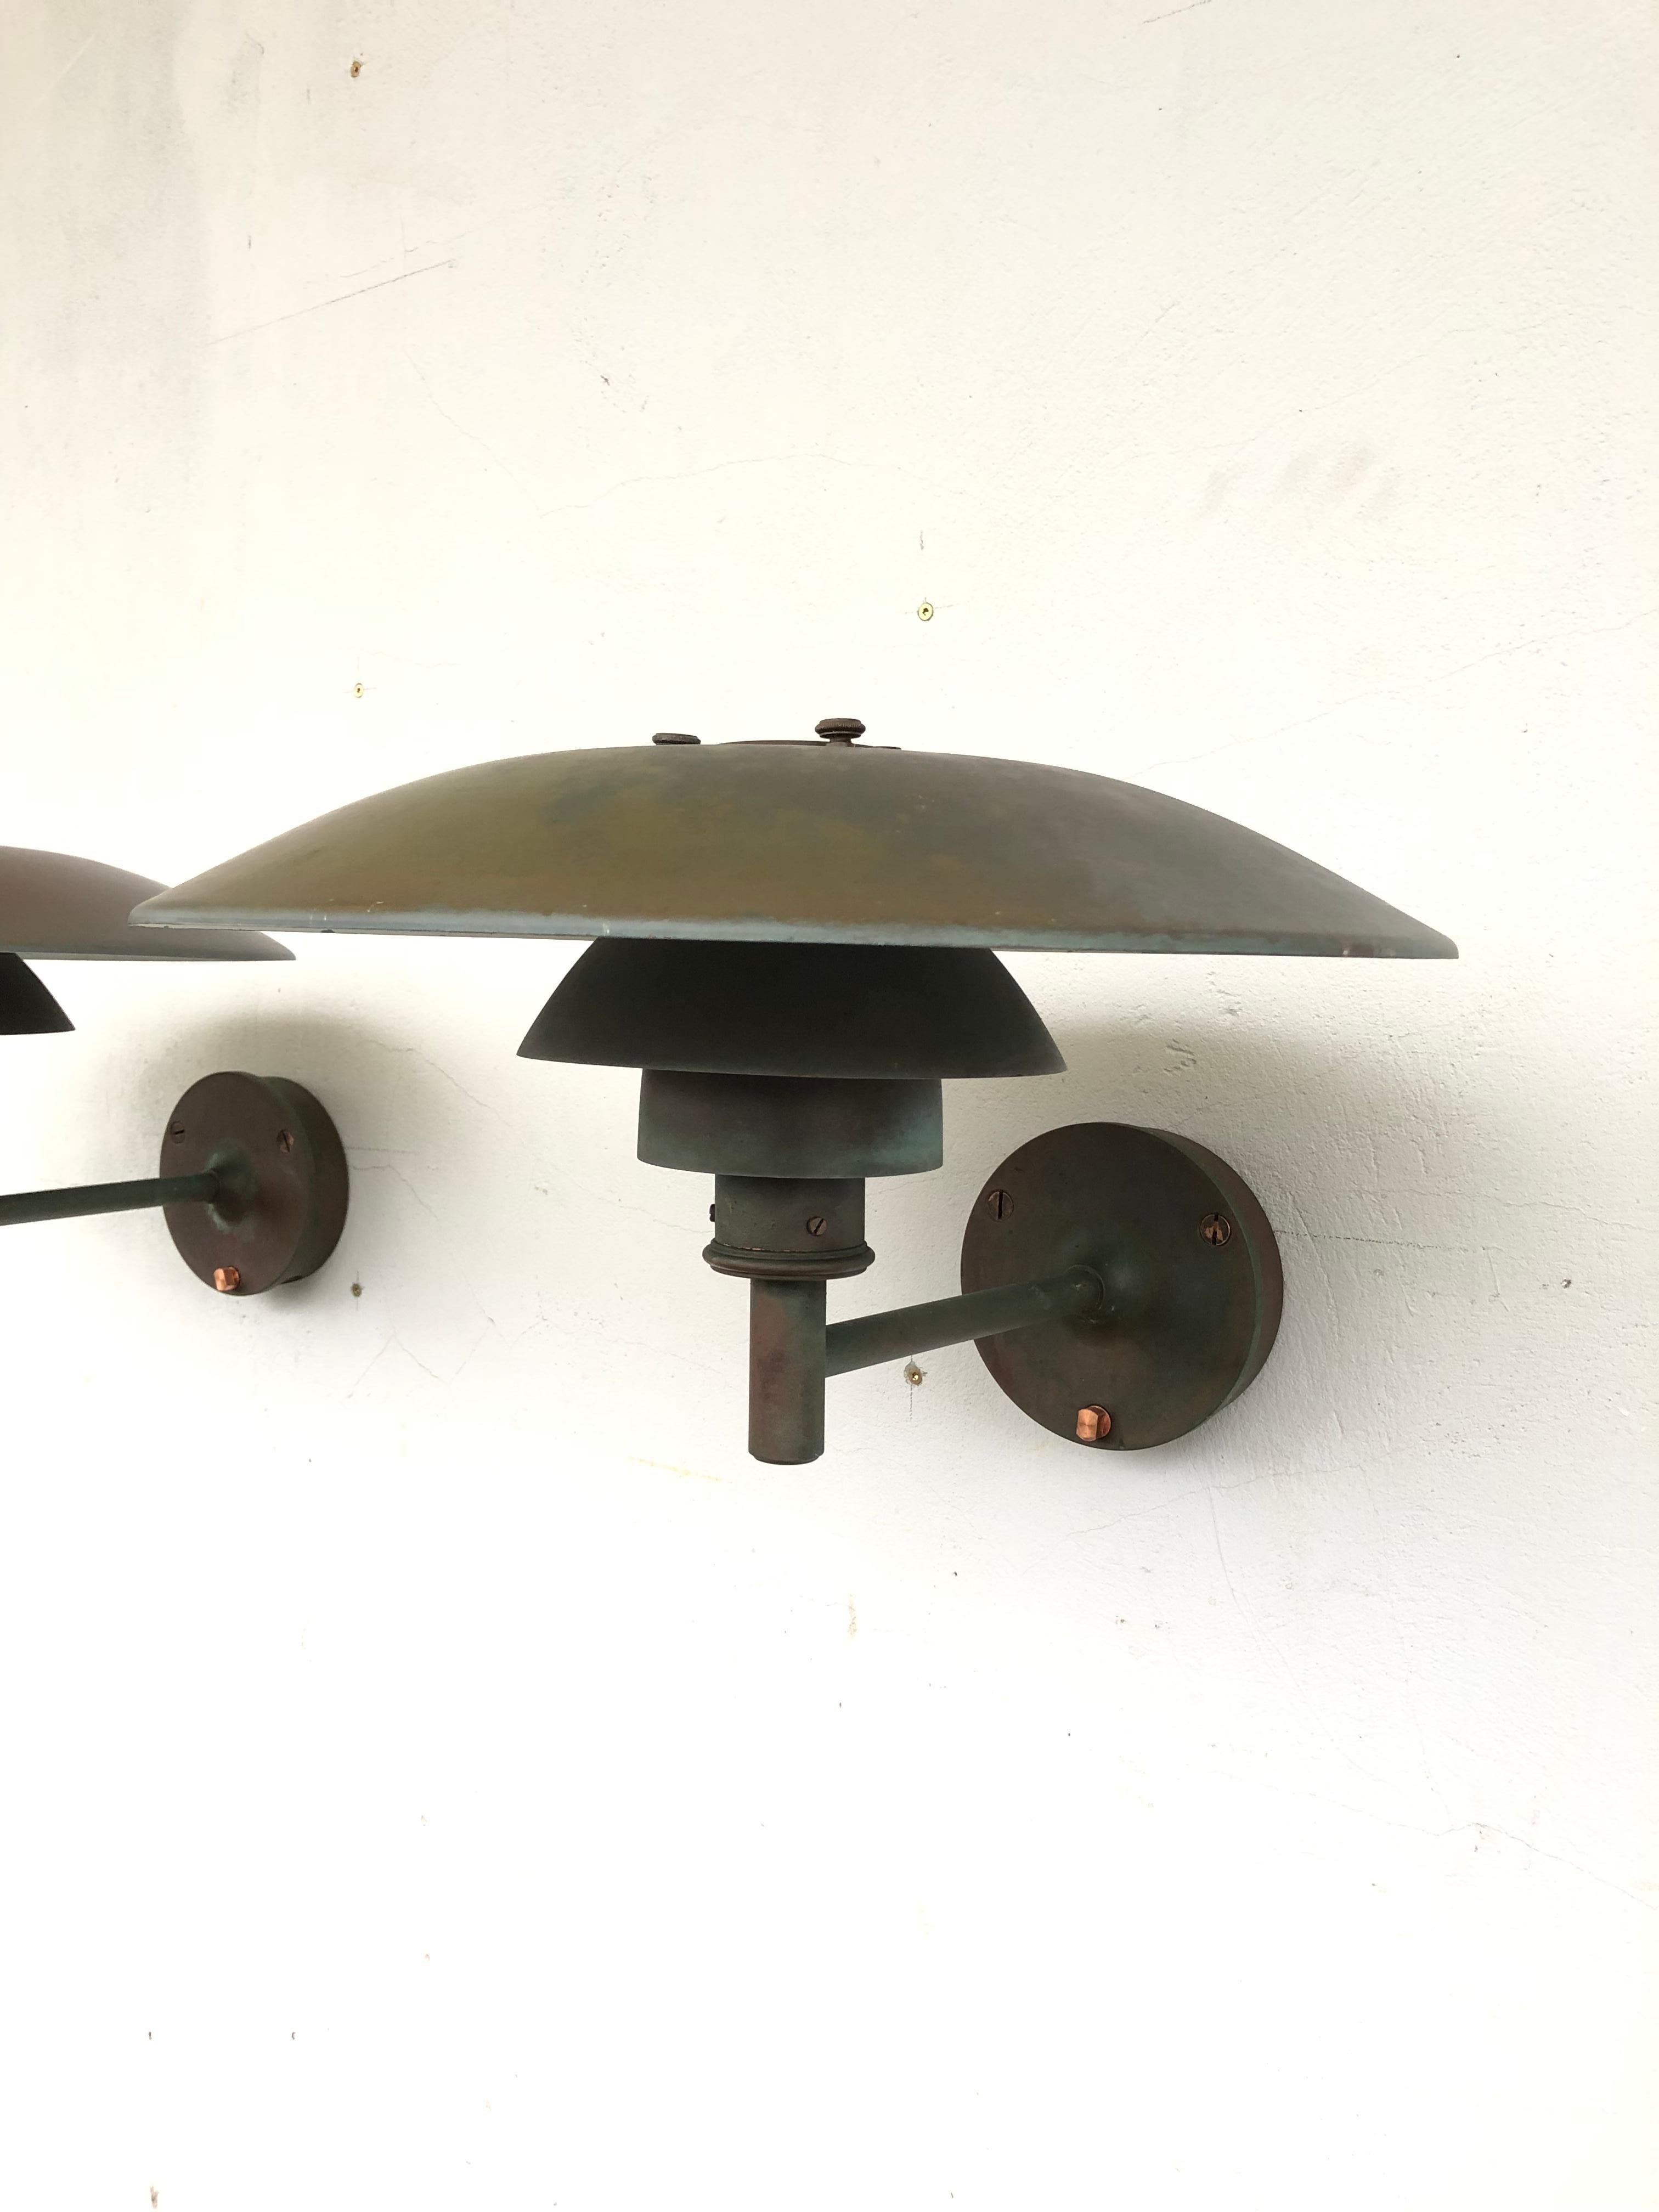 Pair of Iconic Poul Henningsen Copper Wall Lamps by Louis Poulsen of DK 2